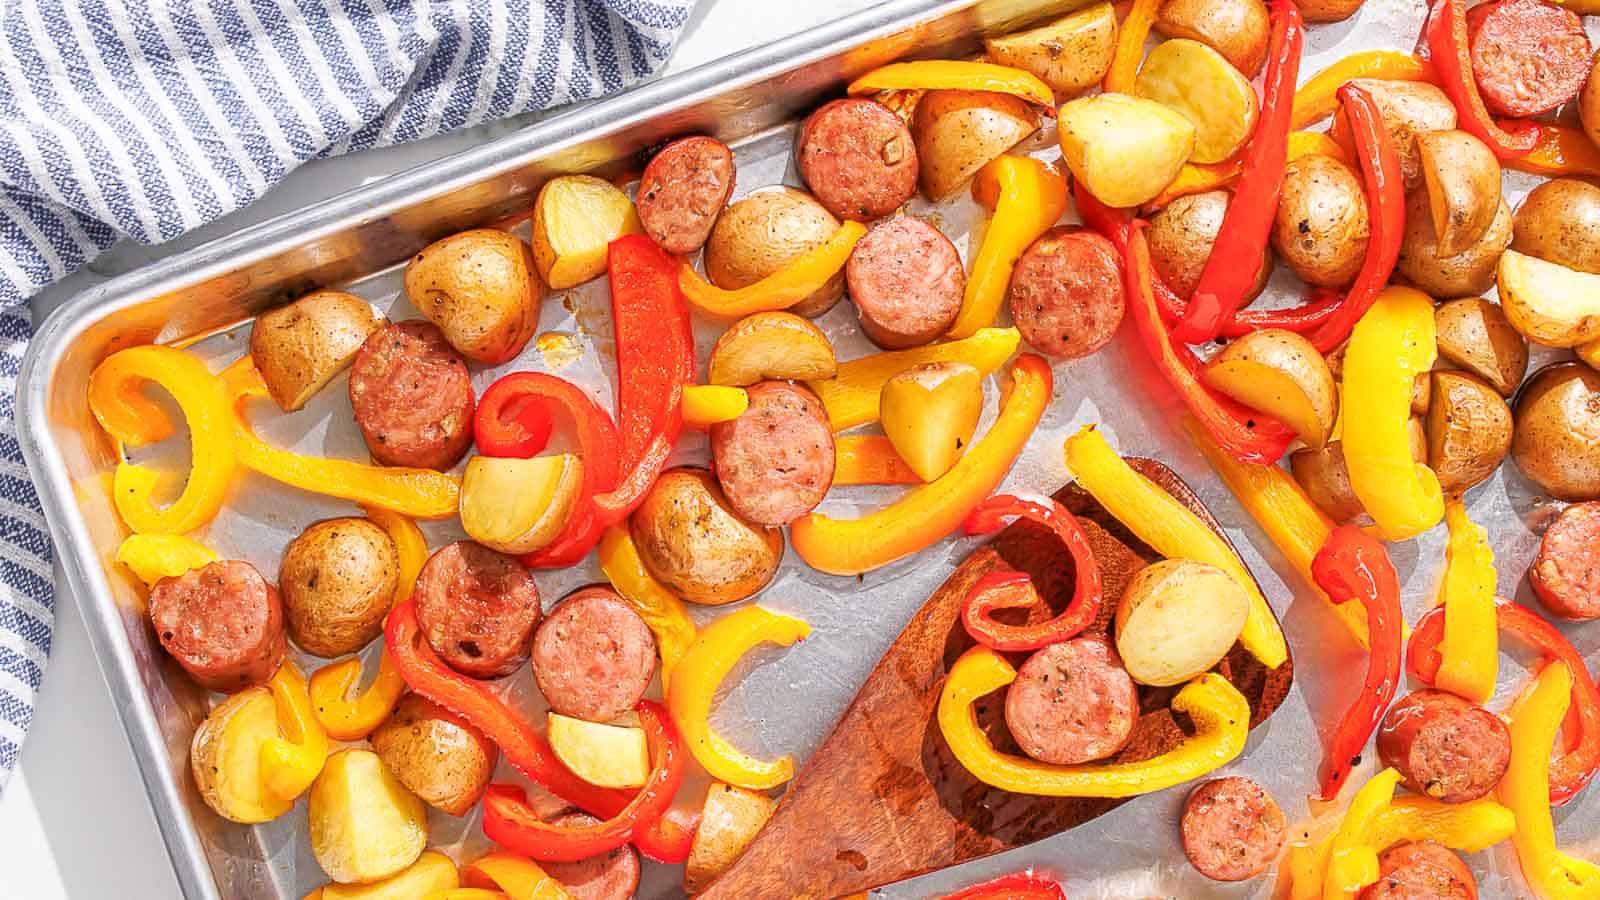 Chicken sausage, potatoes, and bell peppers on a sheet pan.